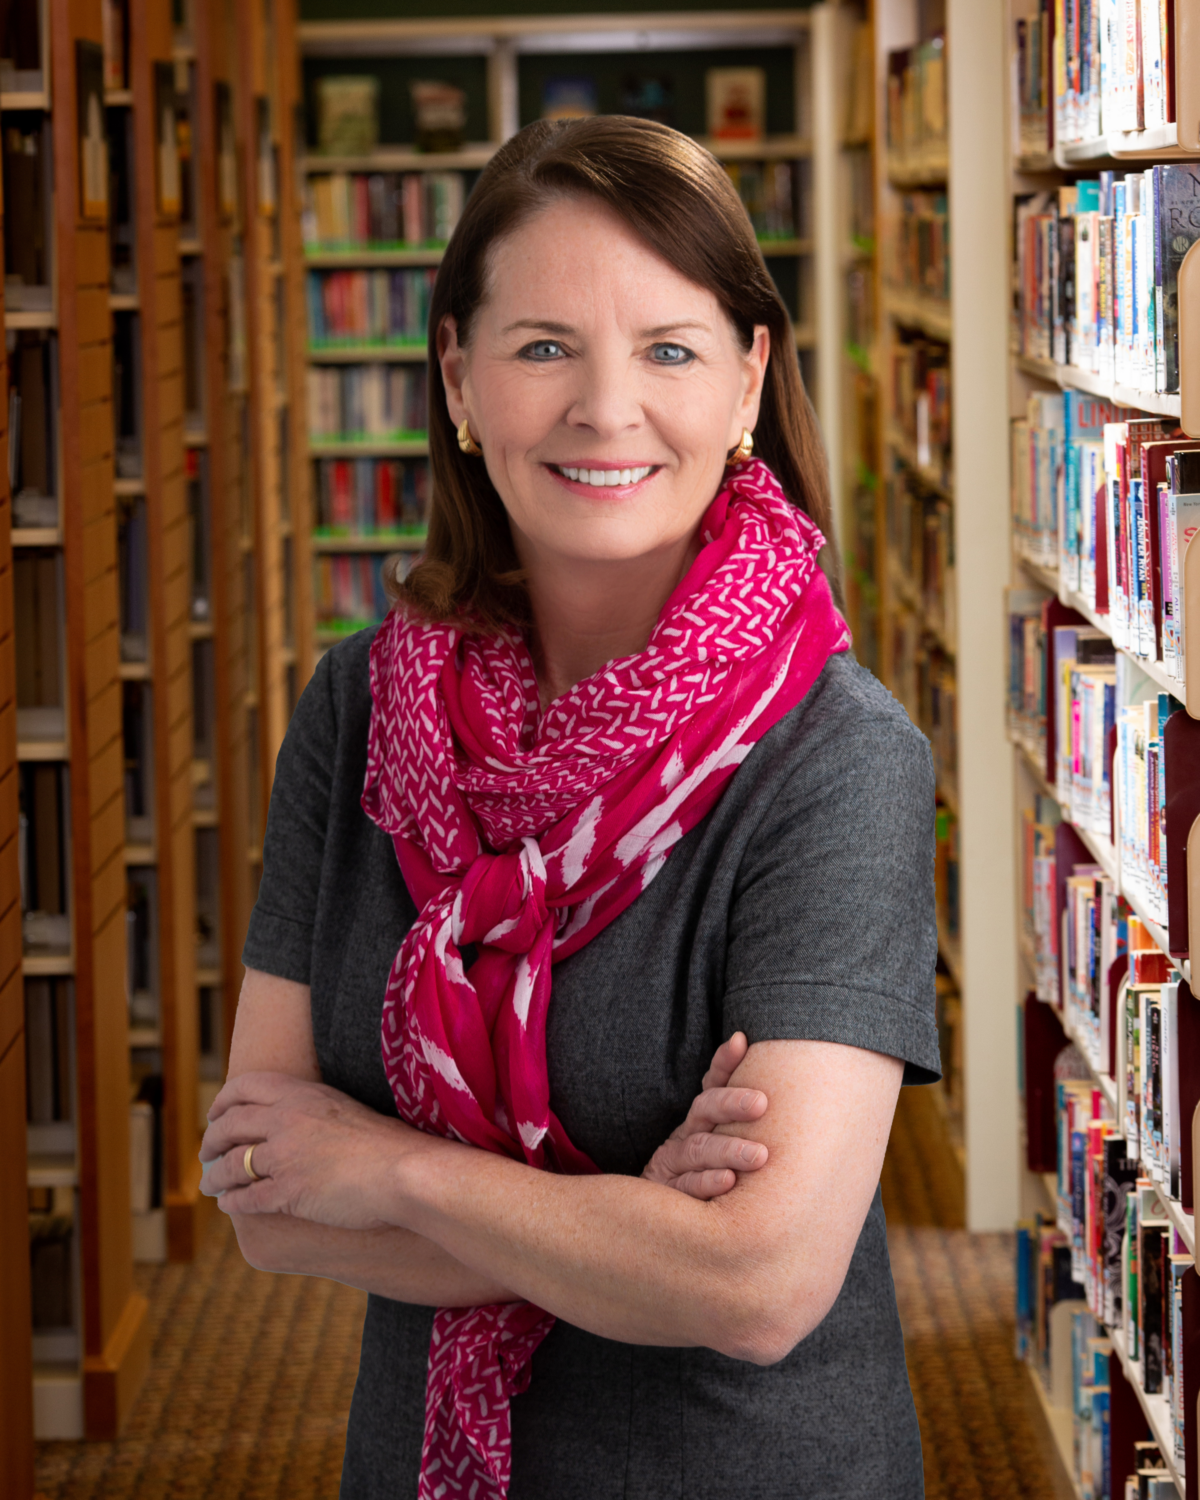 woman with pink scarf crosses her arms while standing in front of book shelves